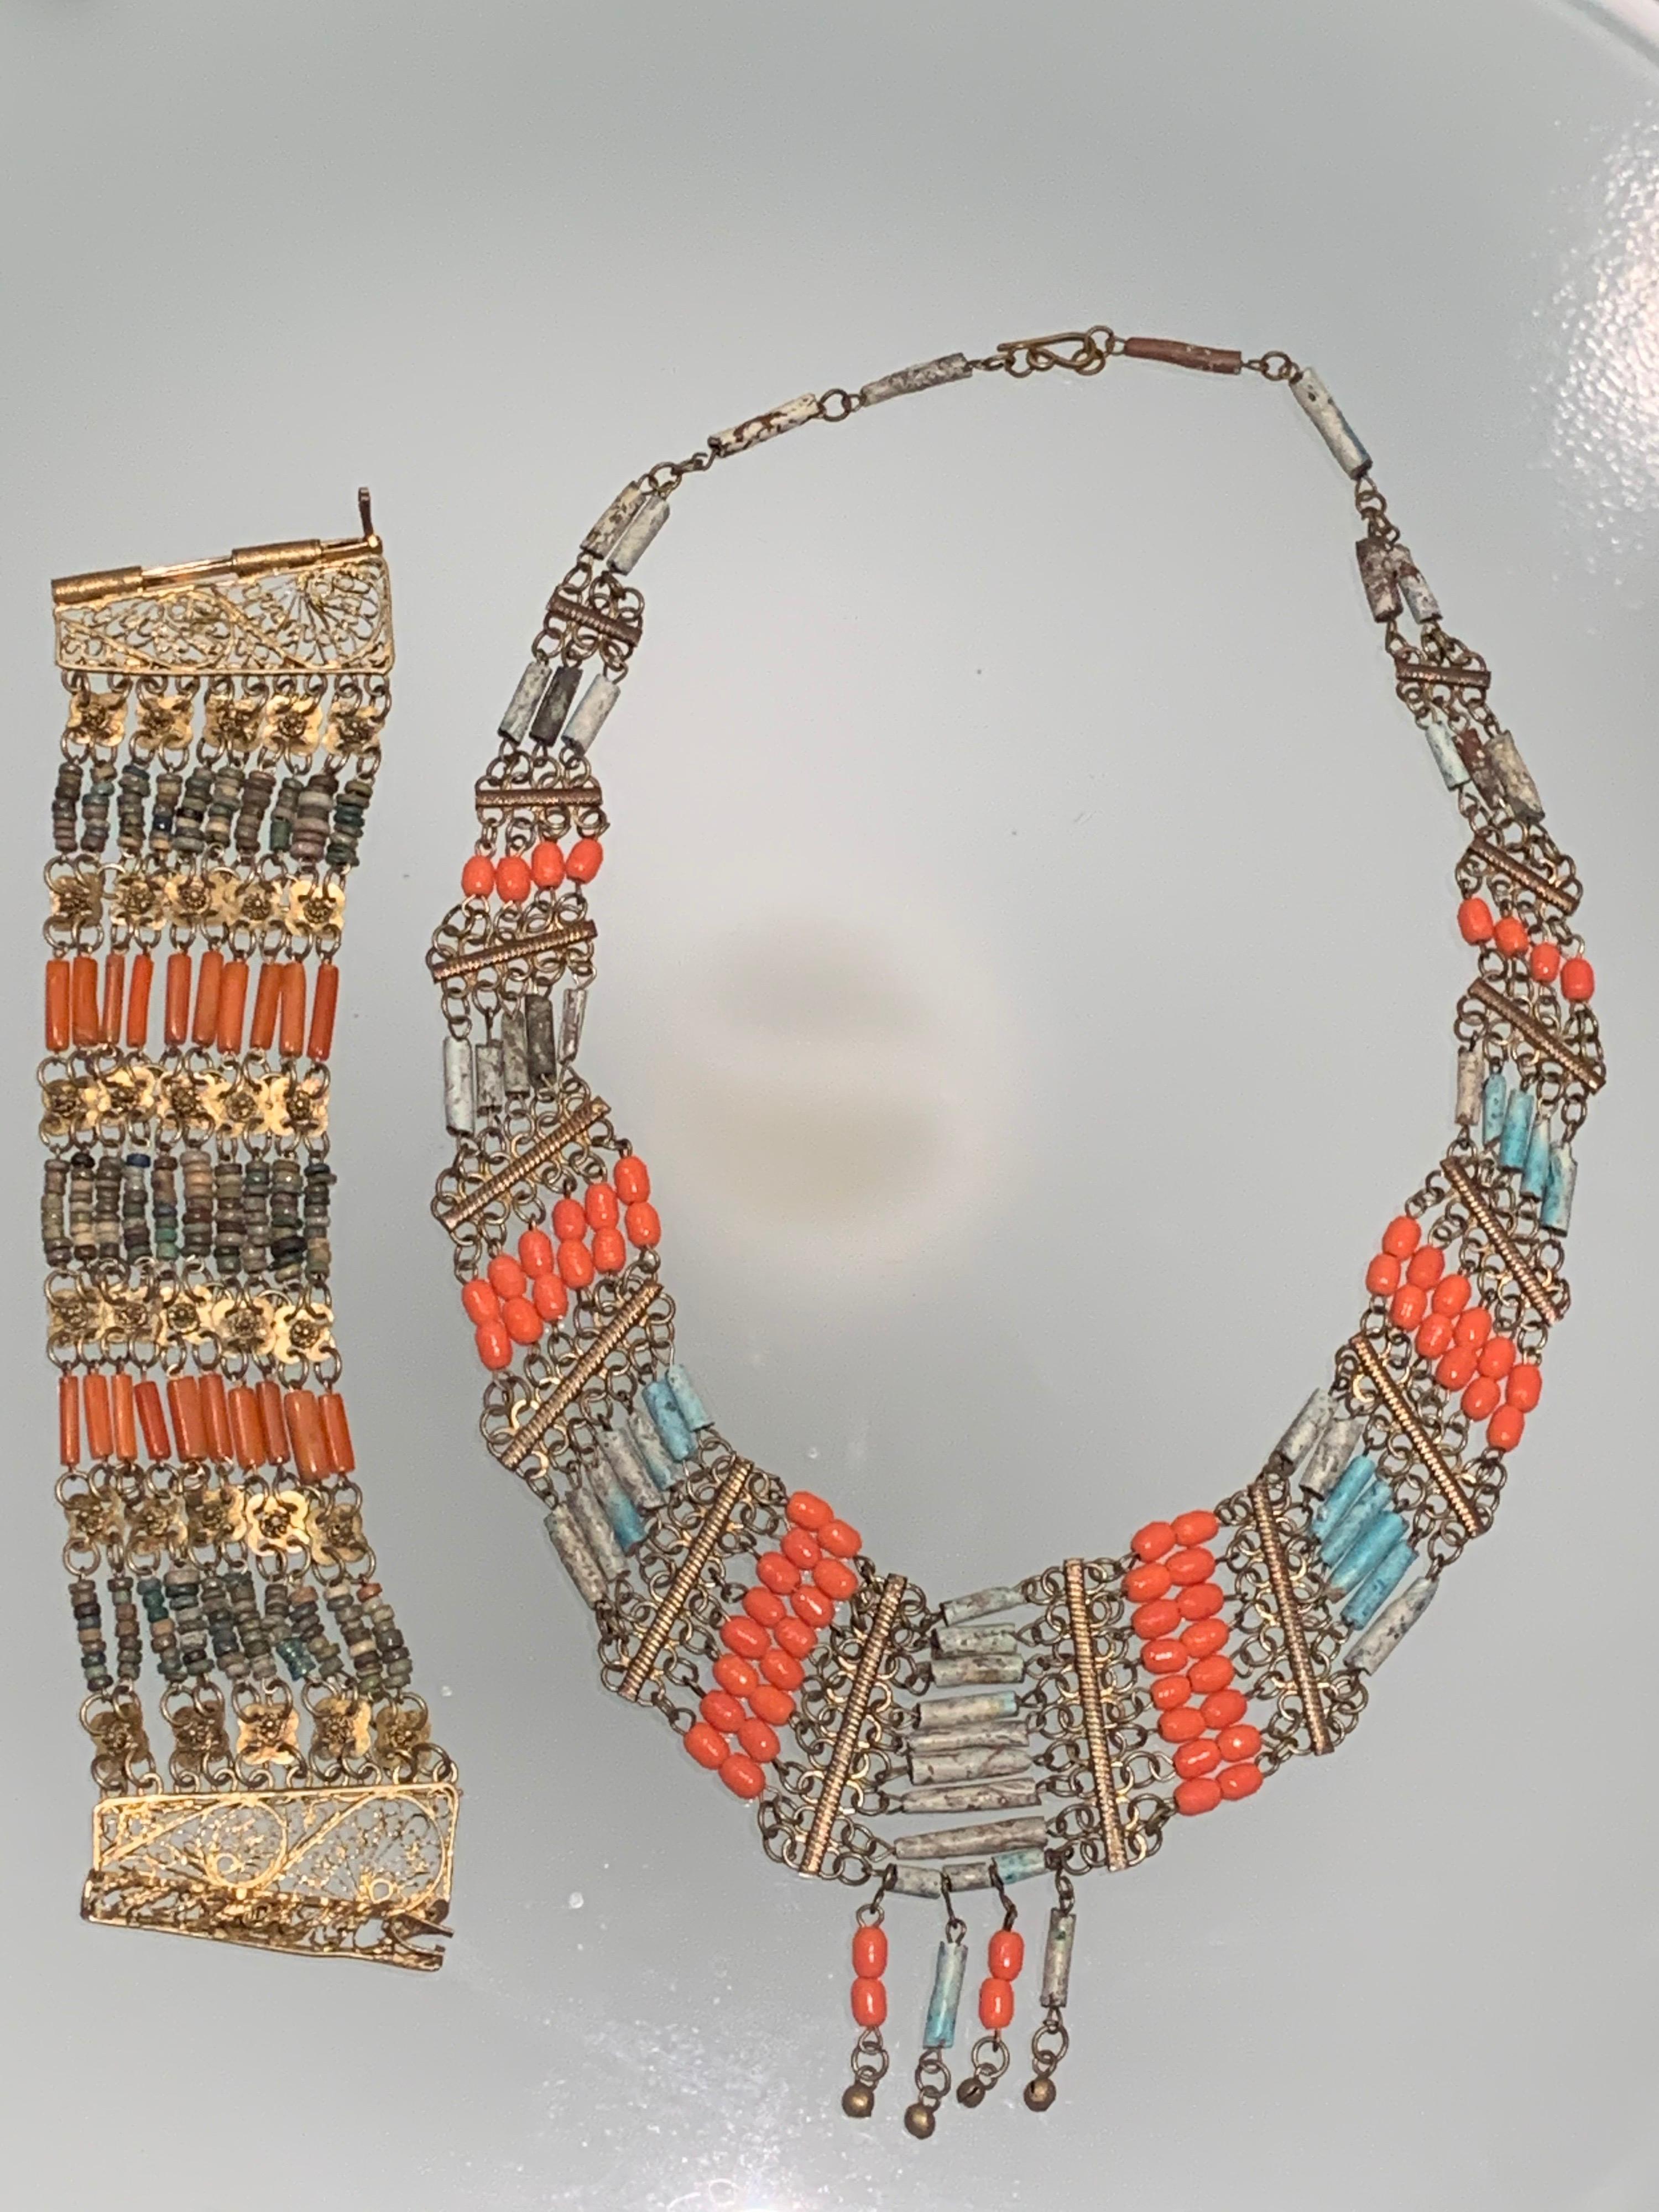 1940s Egyptian clay and brass filigree bib necklace and cuff pairing:  Cuff is wide with a filigree hinge & pin closure. Bib necklace is graduated with coral and turquoise hues in clay beads.  At center of bib are 4 traditional pendant ornaments. 